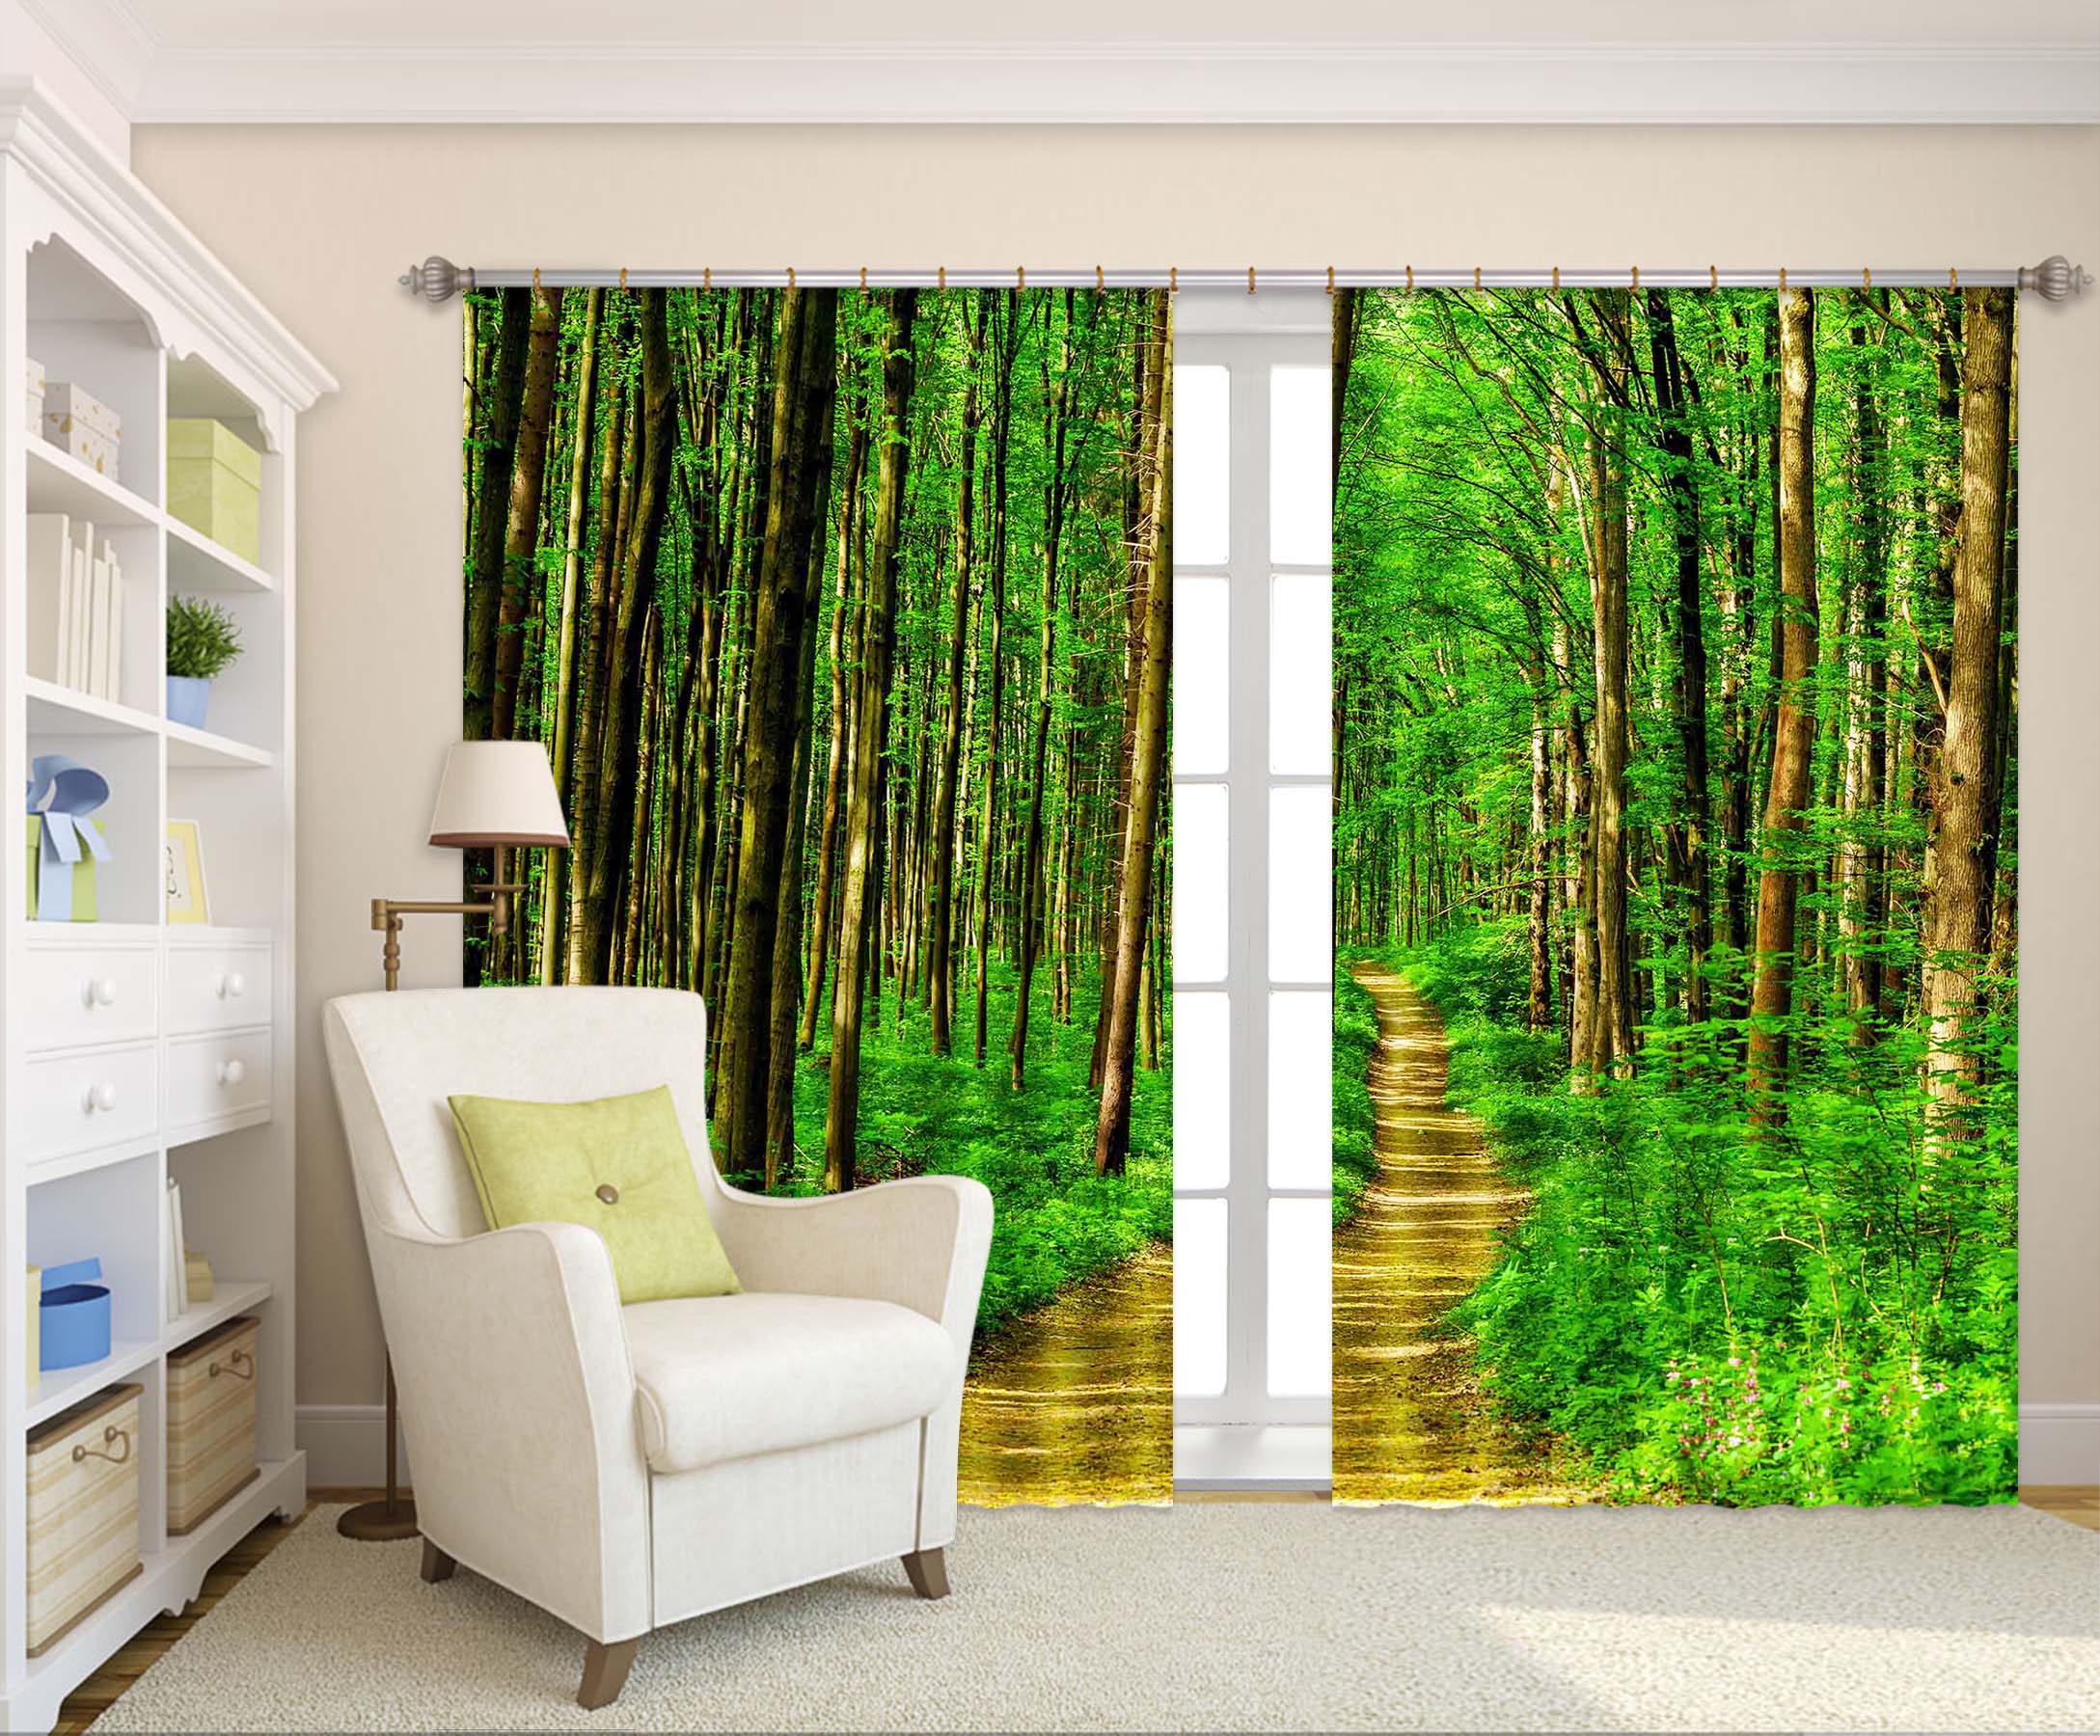 3D Green Forest 809 Curtains Drapes